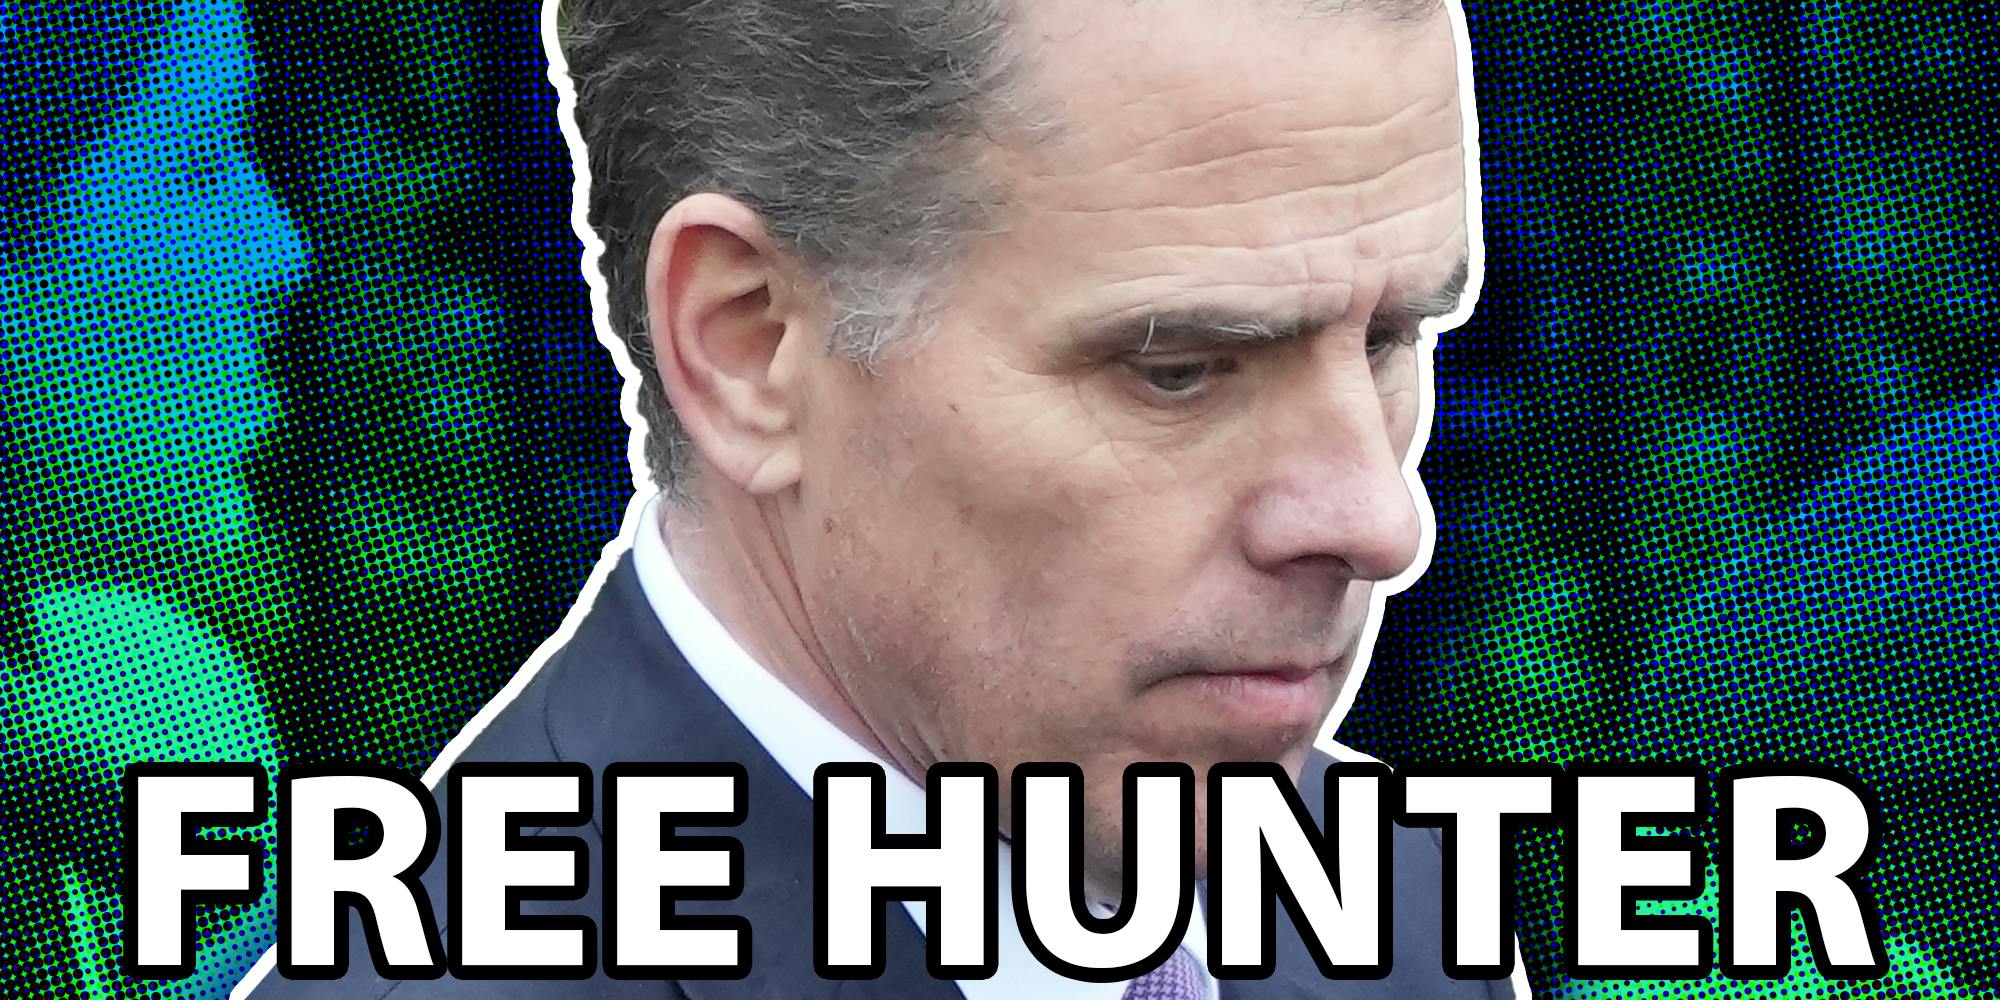 Hunter Biden with text that says "free hunter" over it